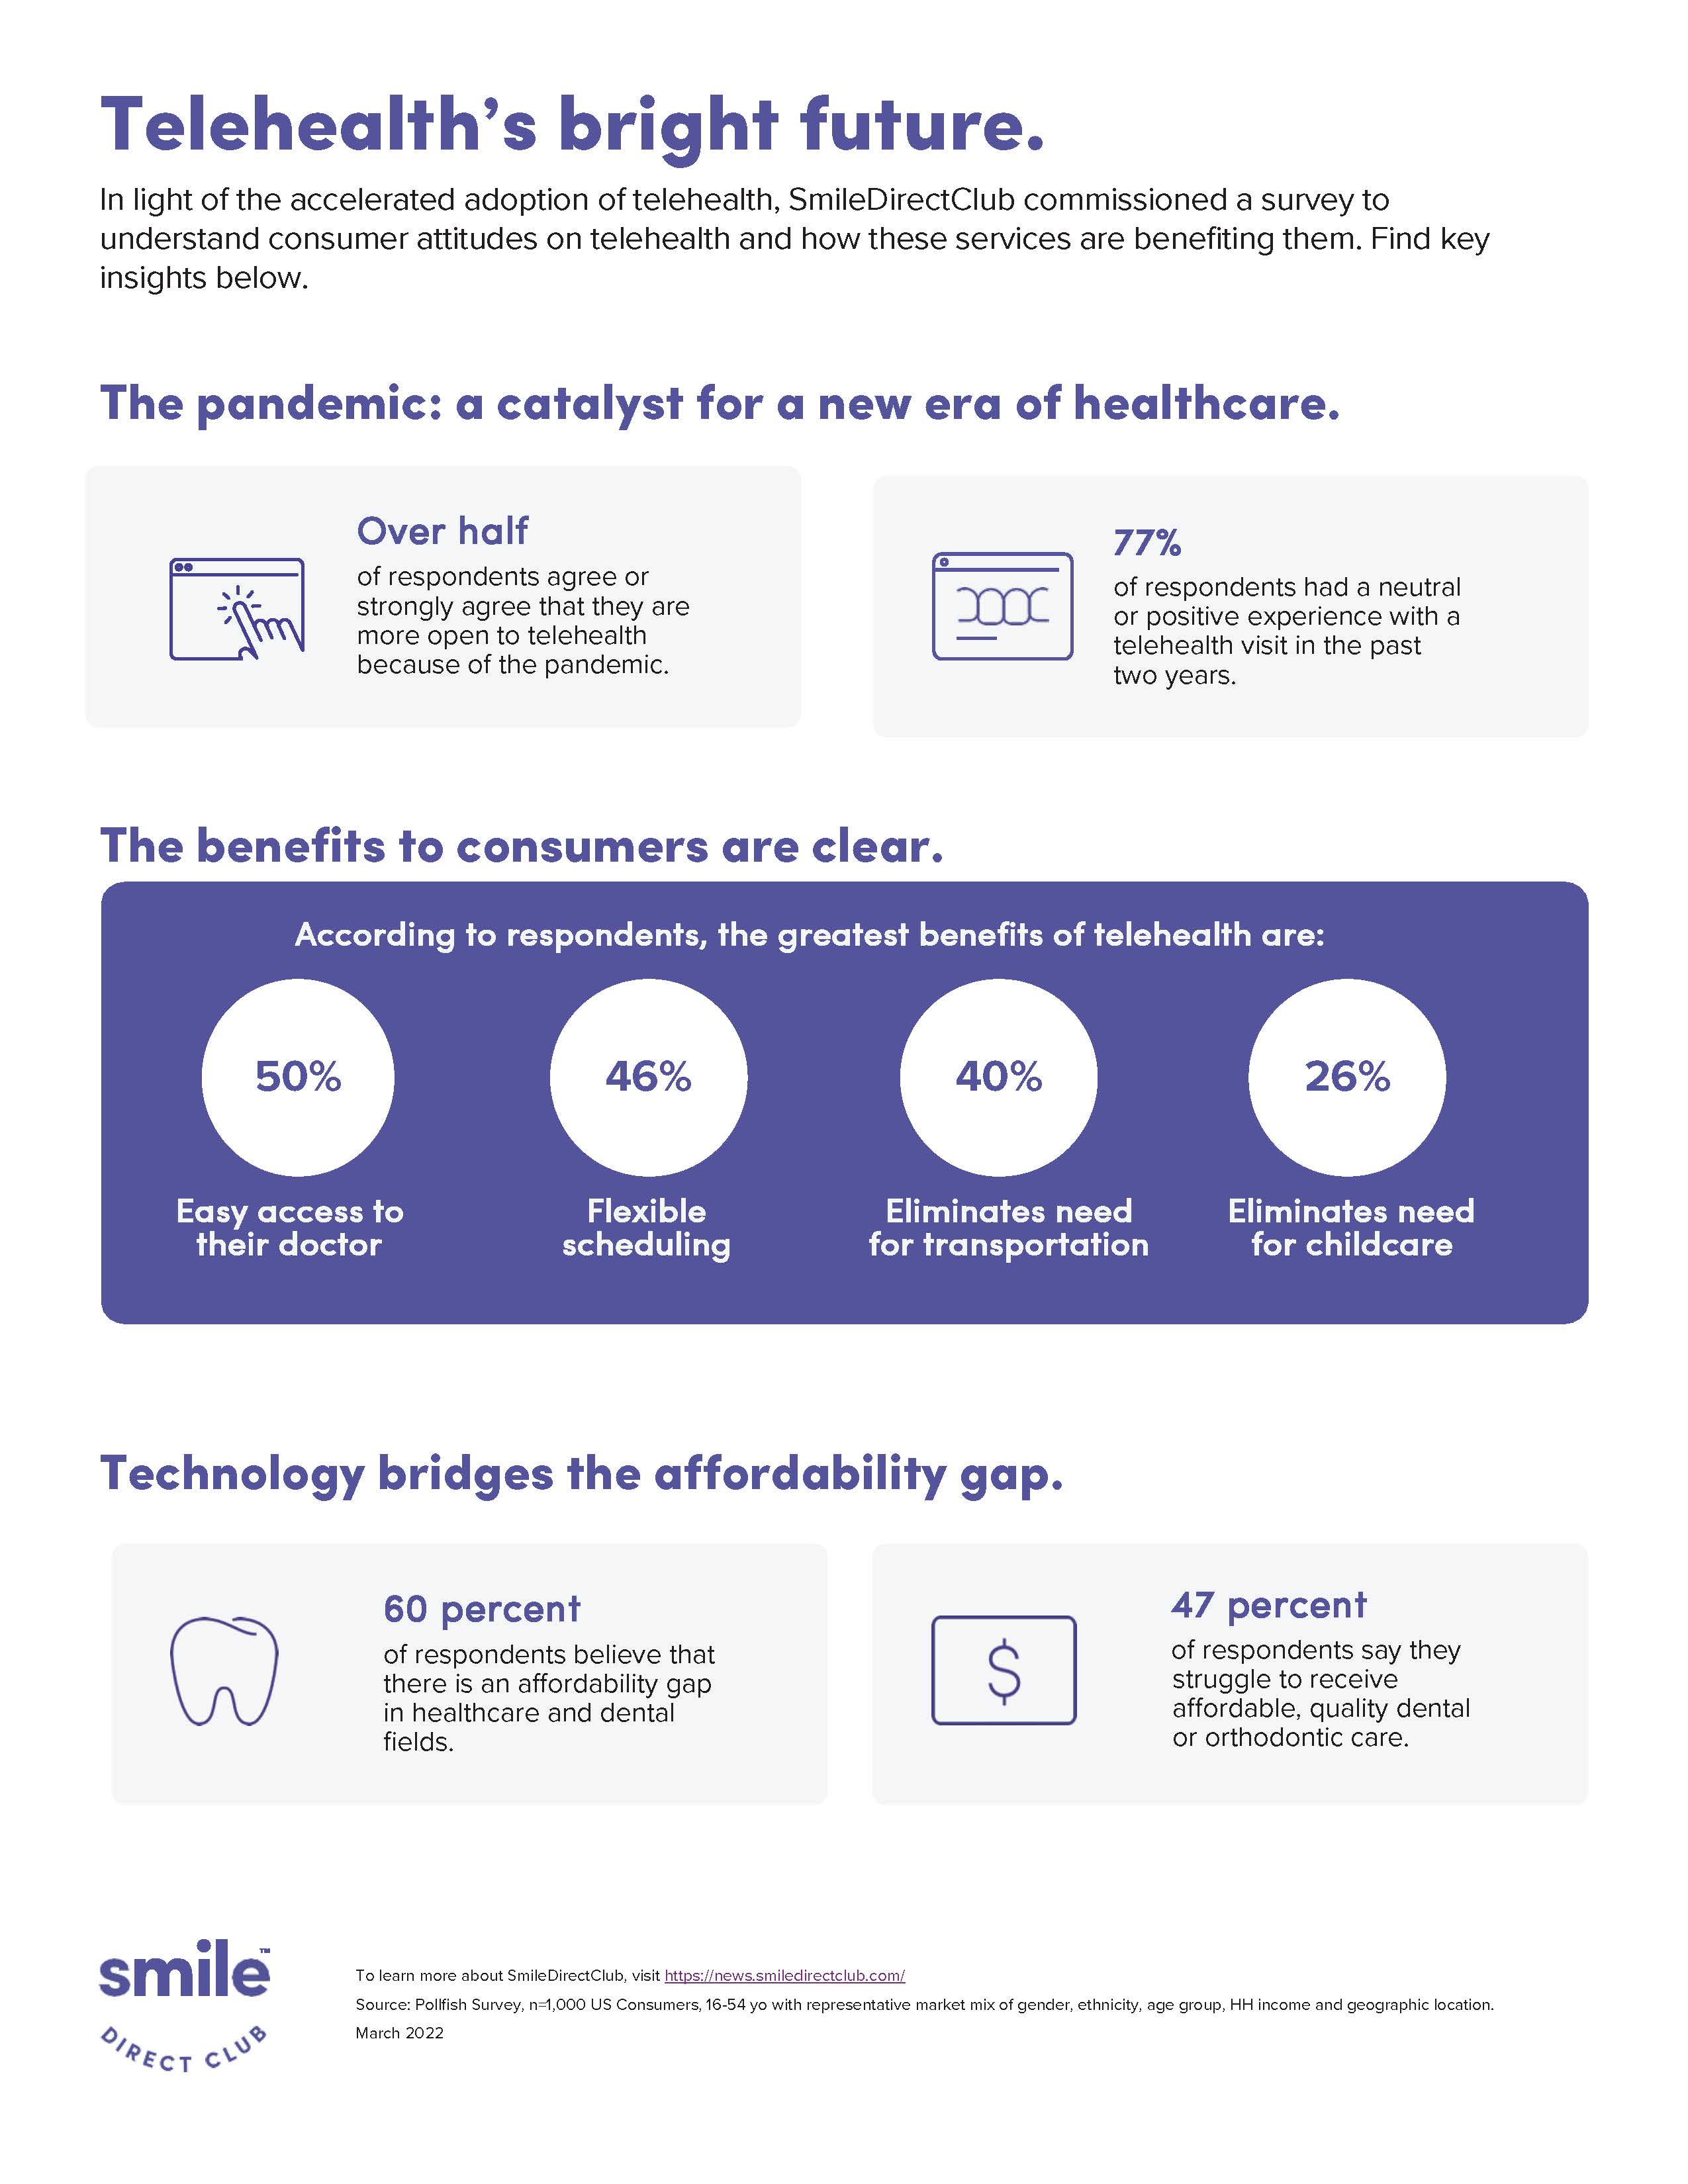 In light of the accelerated adoption of telehealth, SmileDirectClub commissioned a survey to understand consumer attitudes on telehealth and how these services are benefiting them.